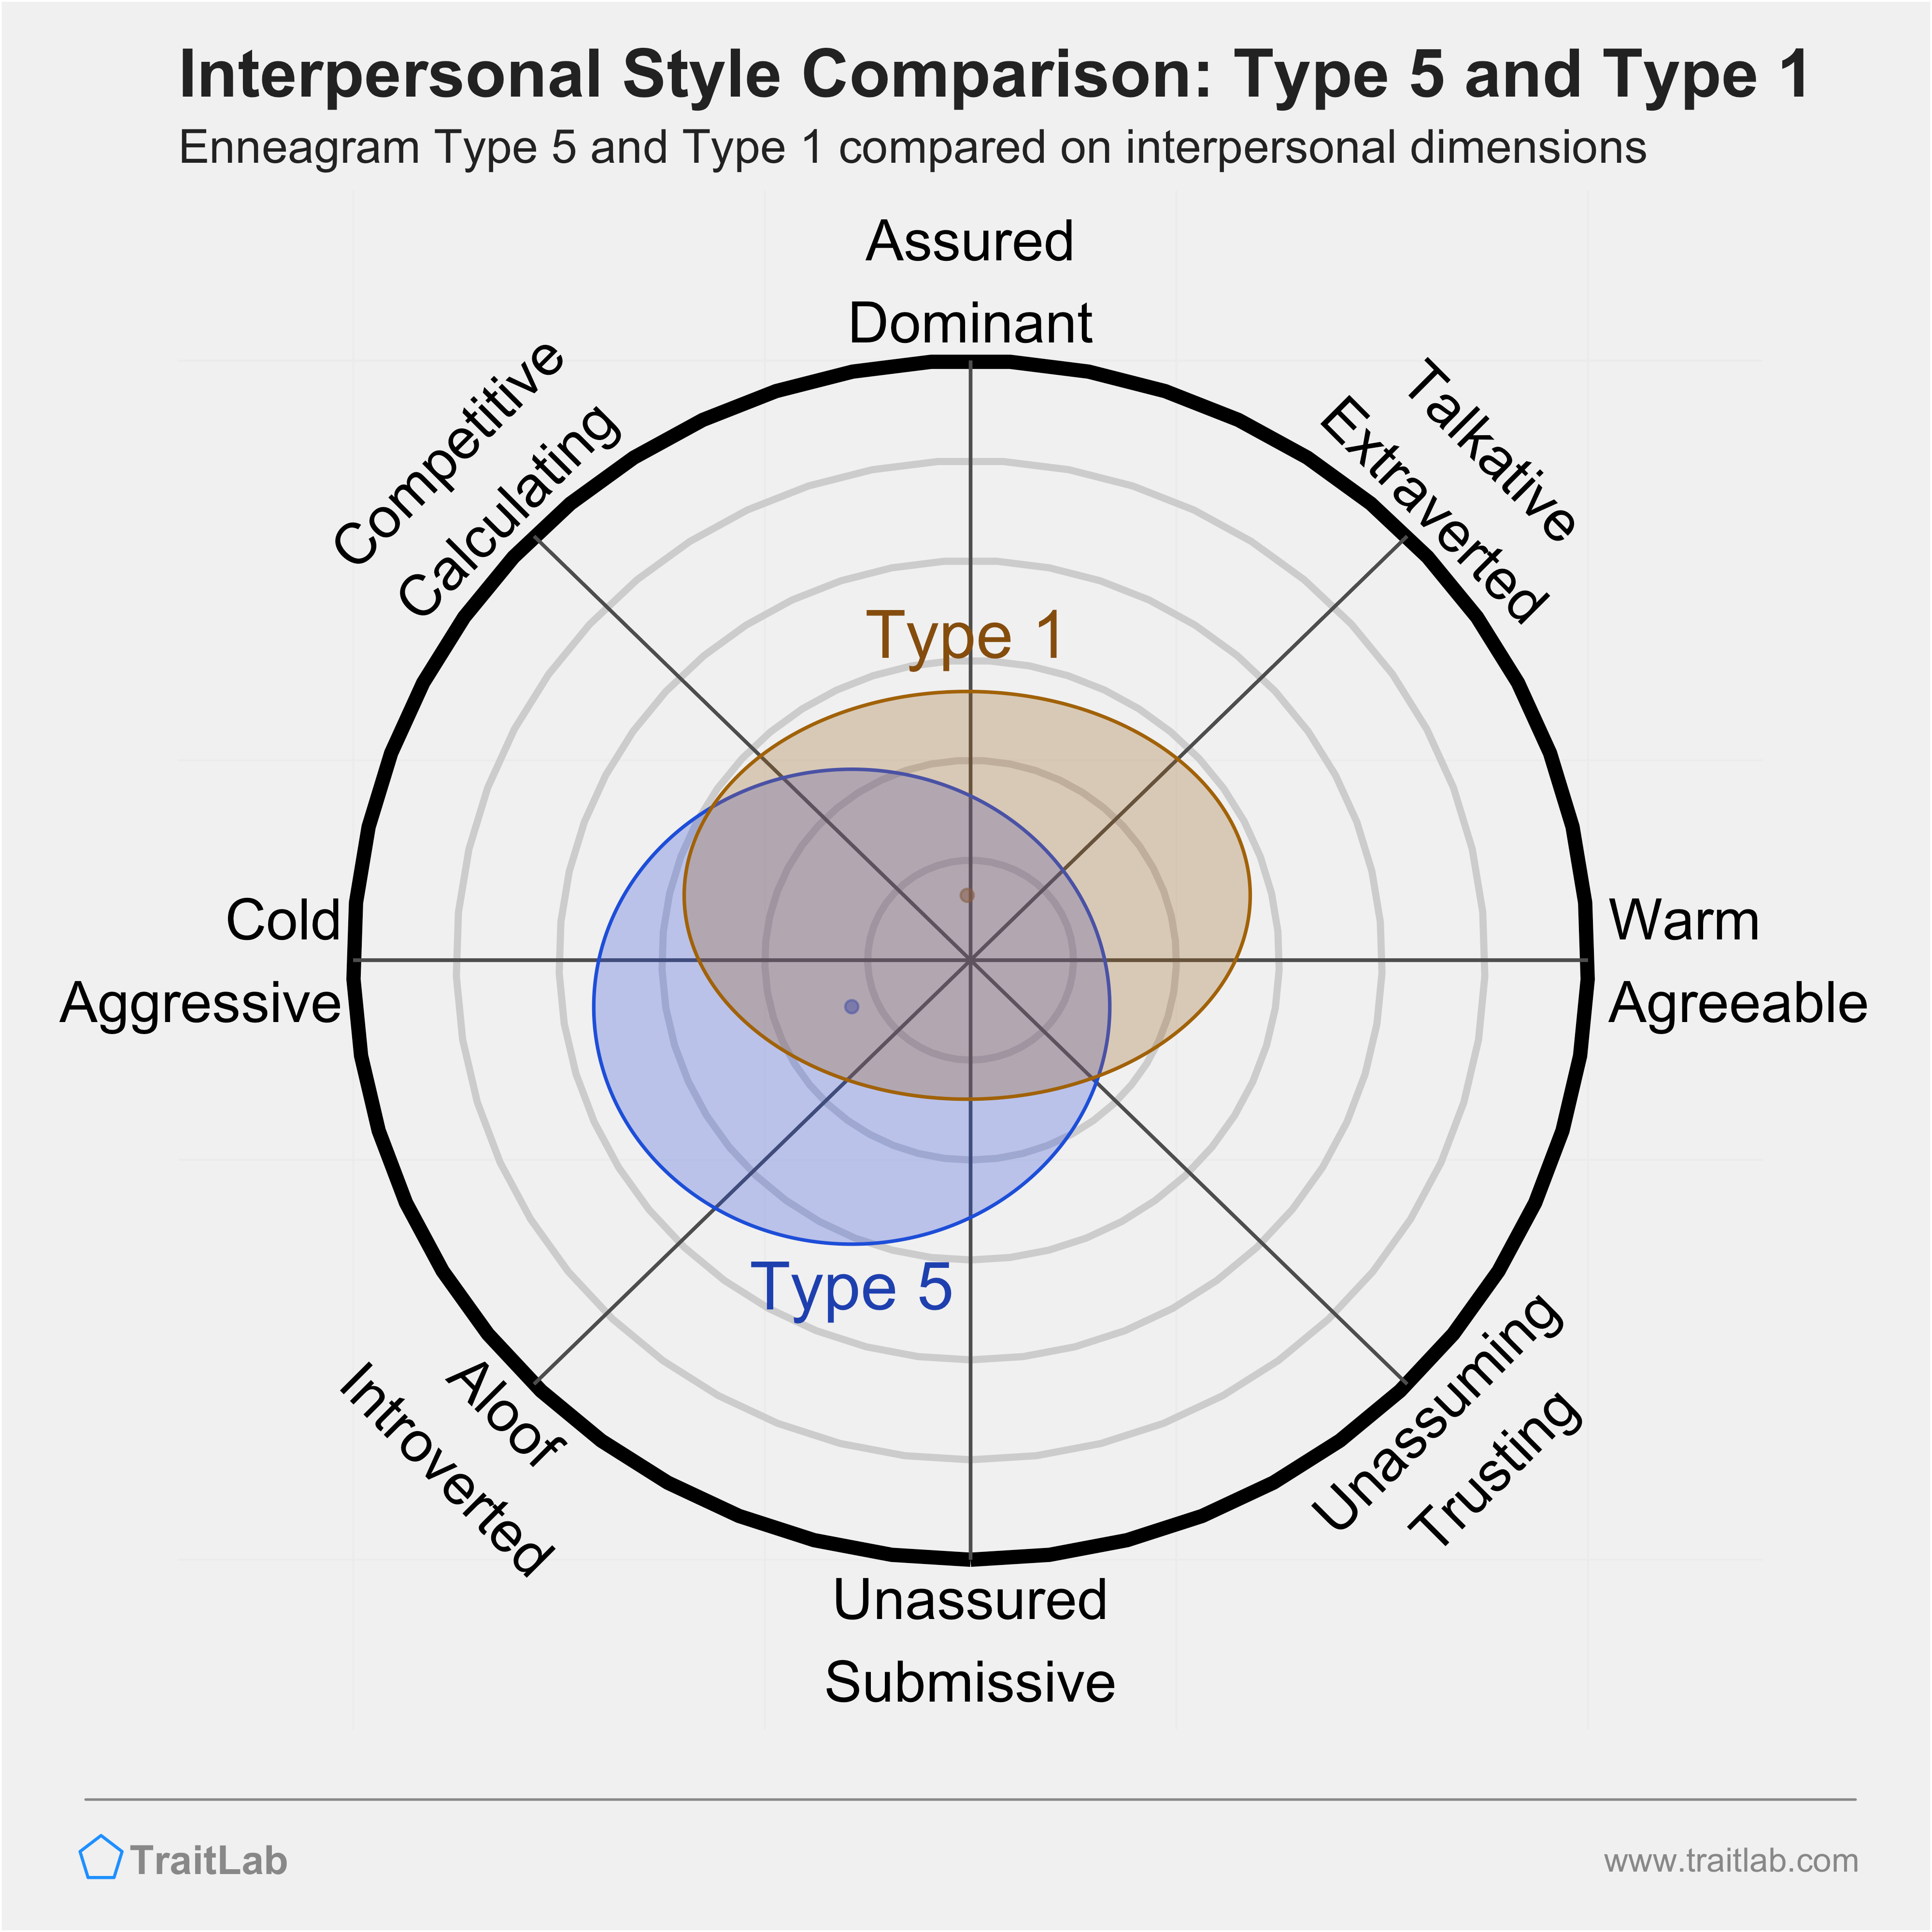 Enneagram Type 5 and Type 1 comparison across interpersonal dimensions